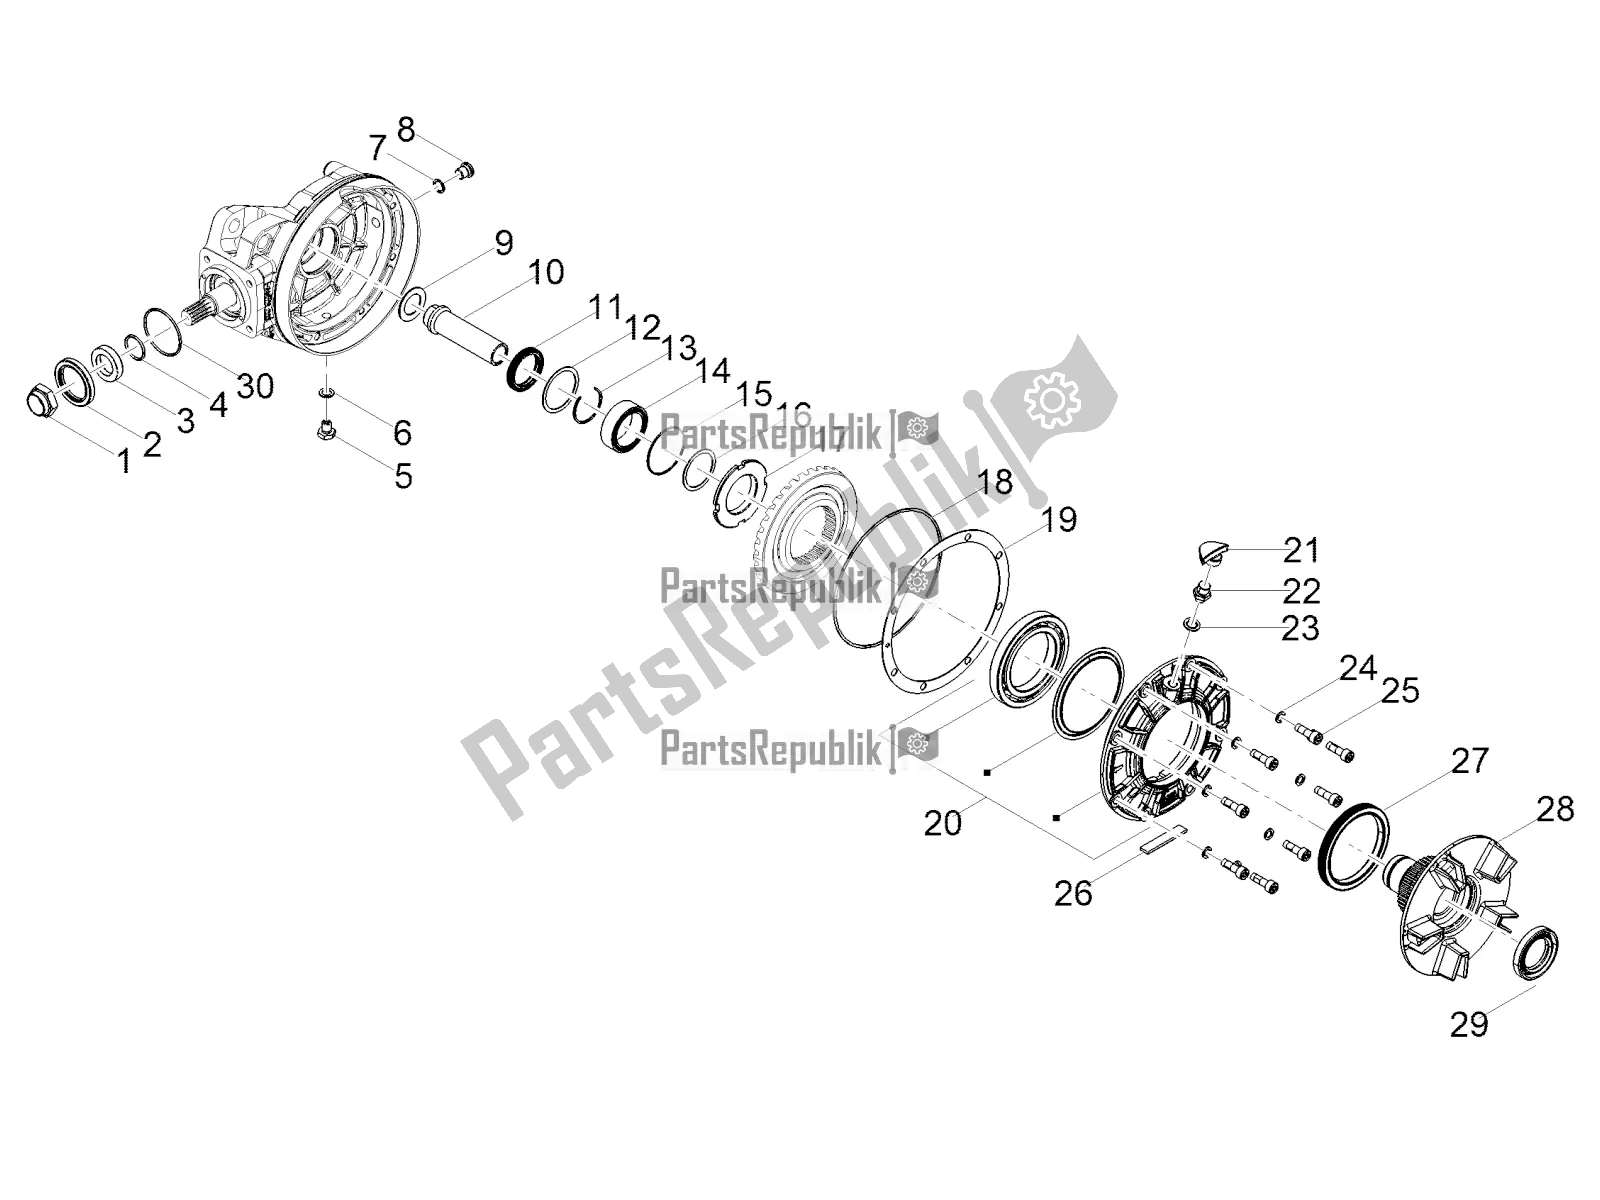 All parts for the Rear Transmission / Components of the Moto-Guzzi V 85 TT Travel Pack Apac 850 2021